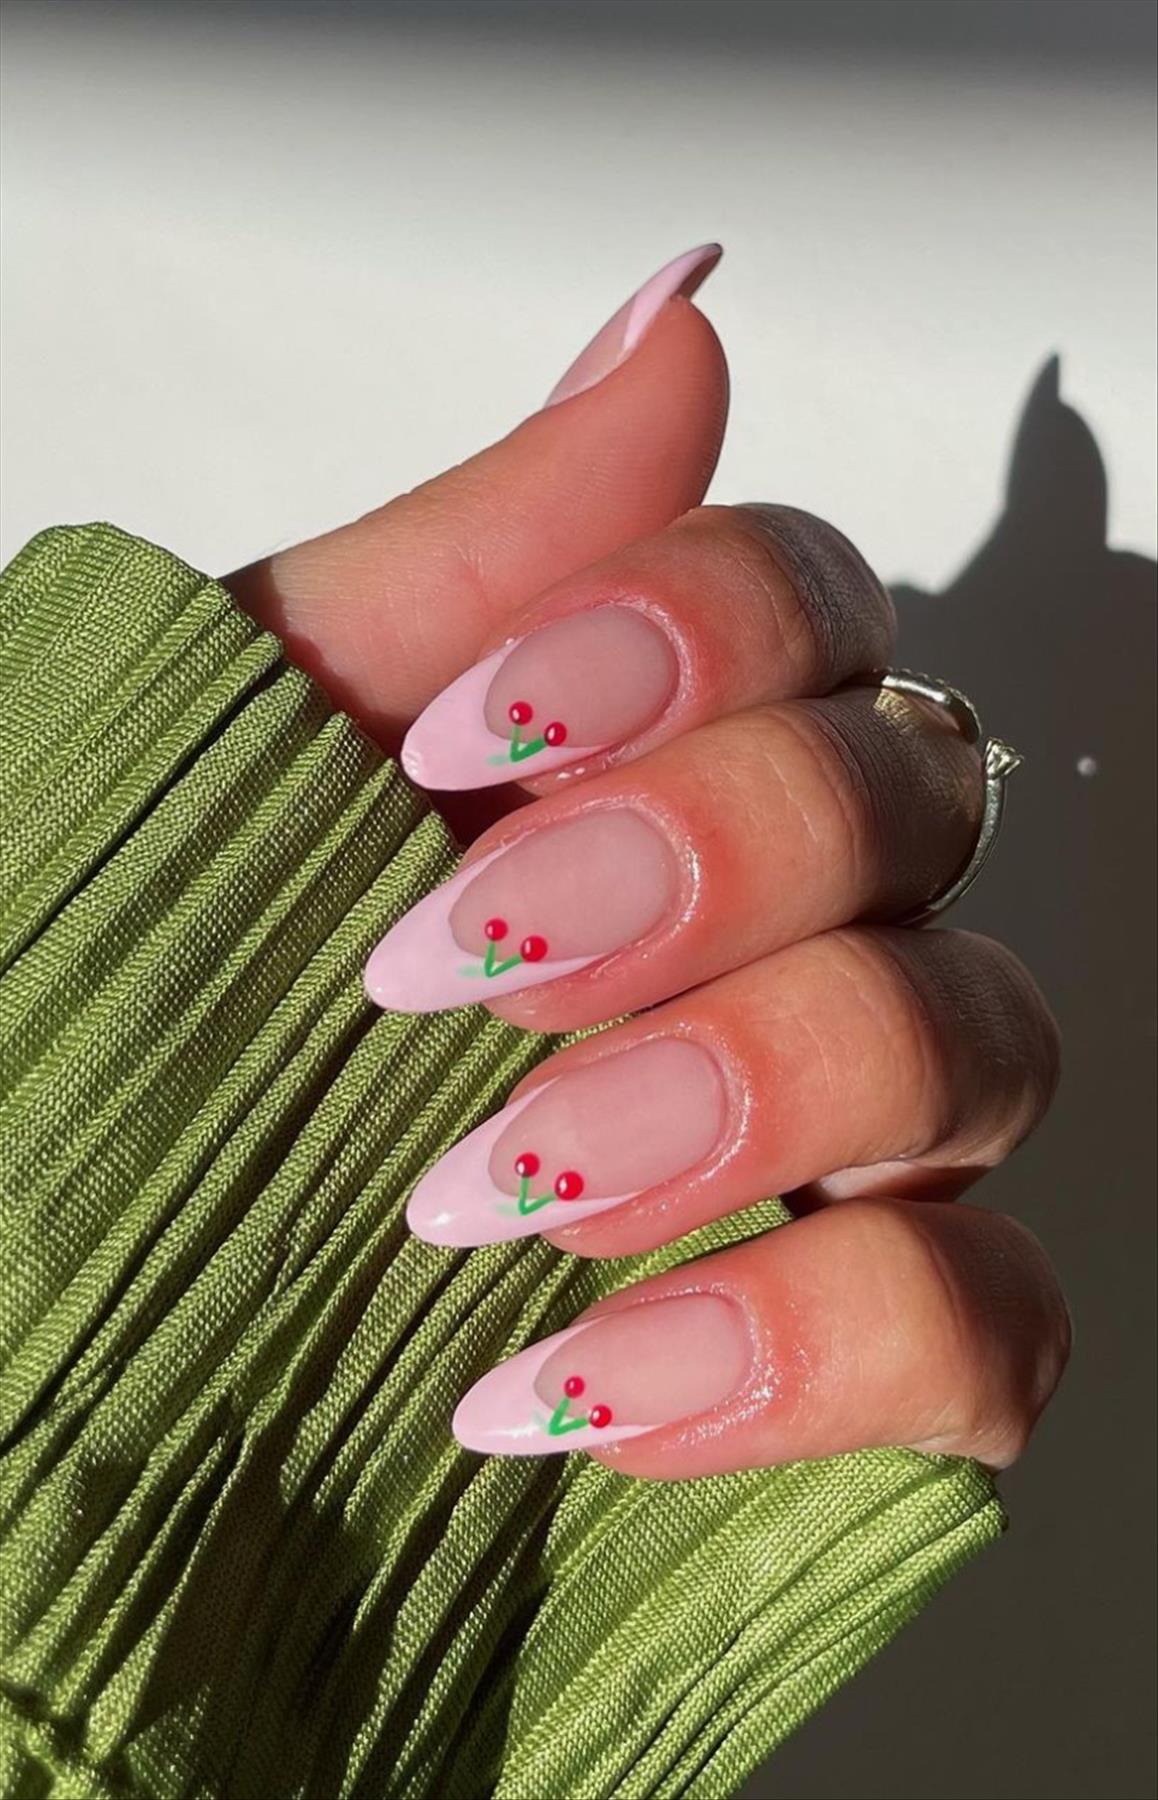 Stunning French tip almond nails cool in any season